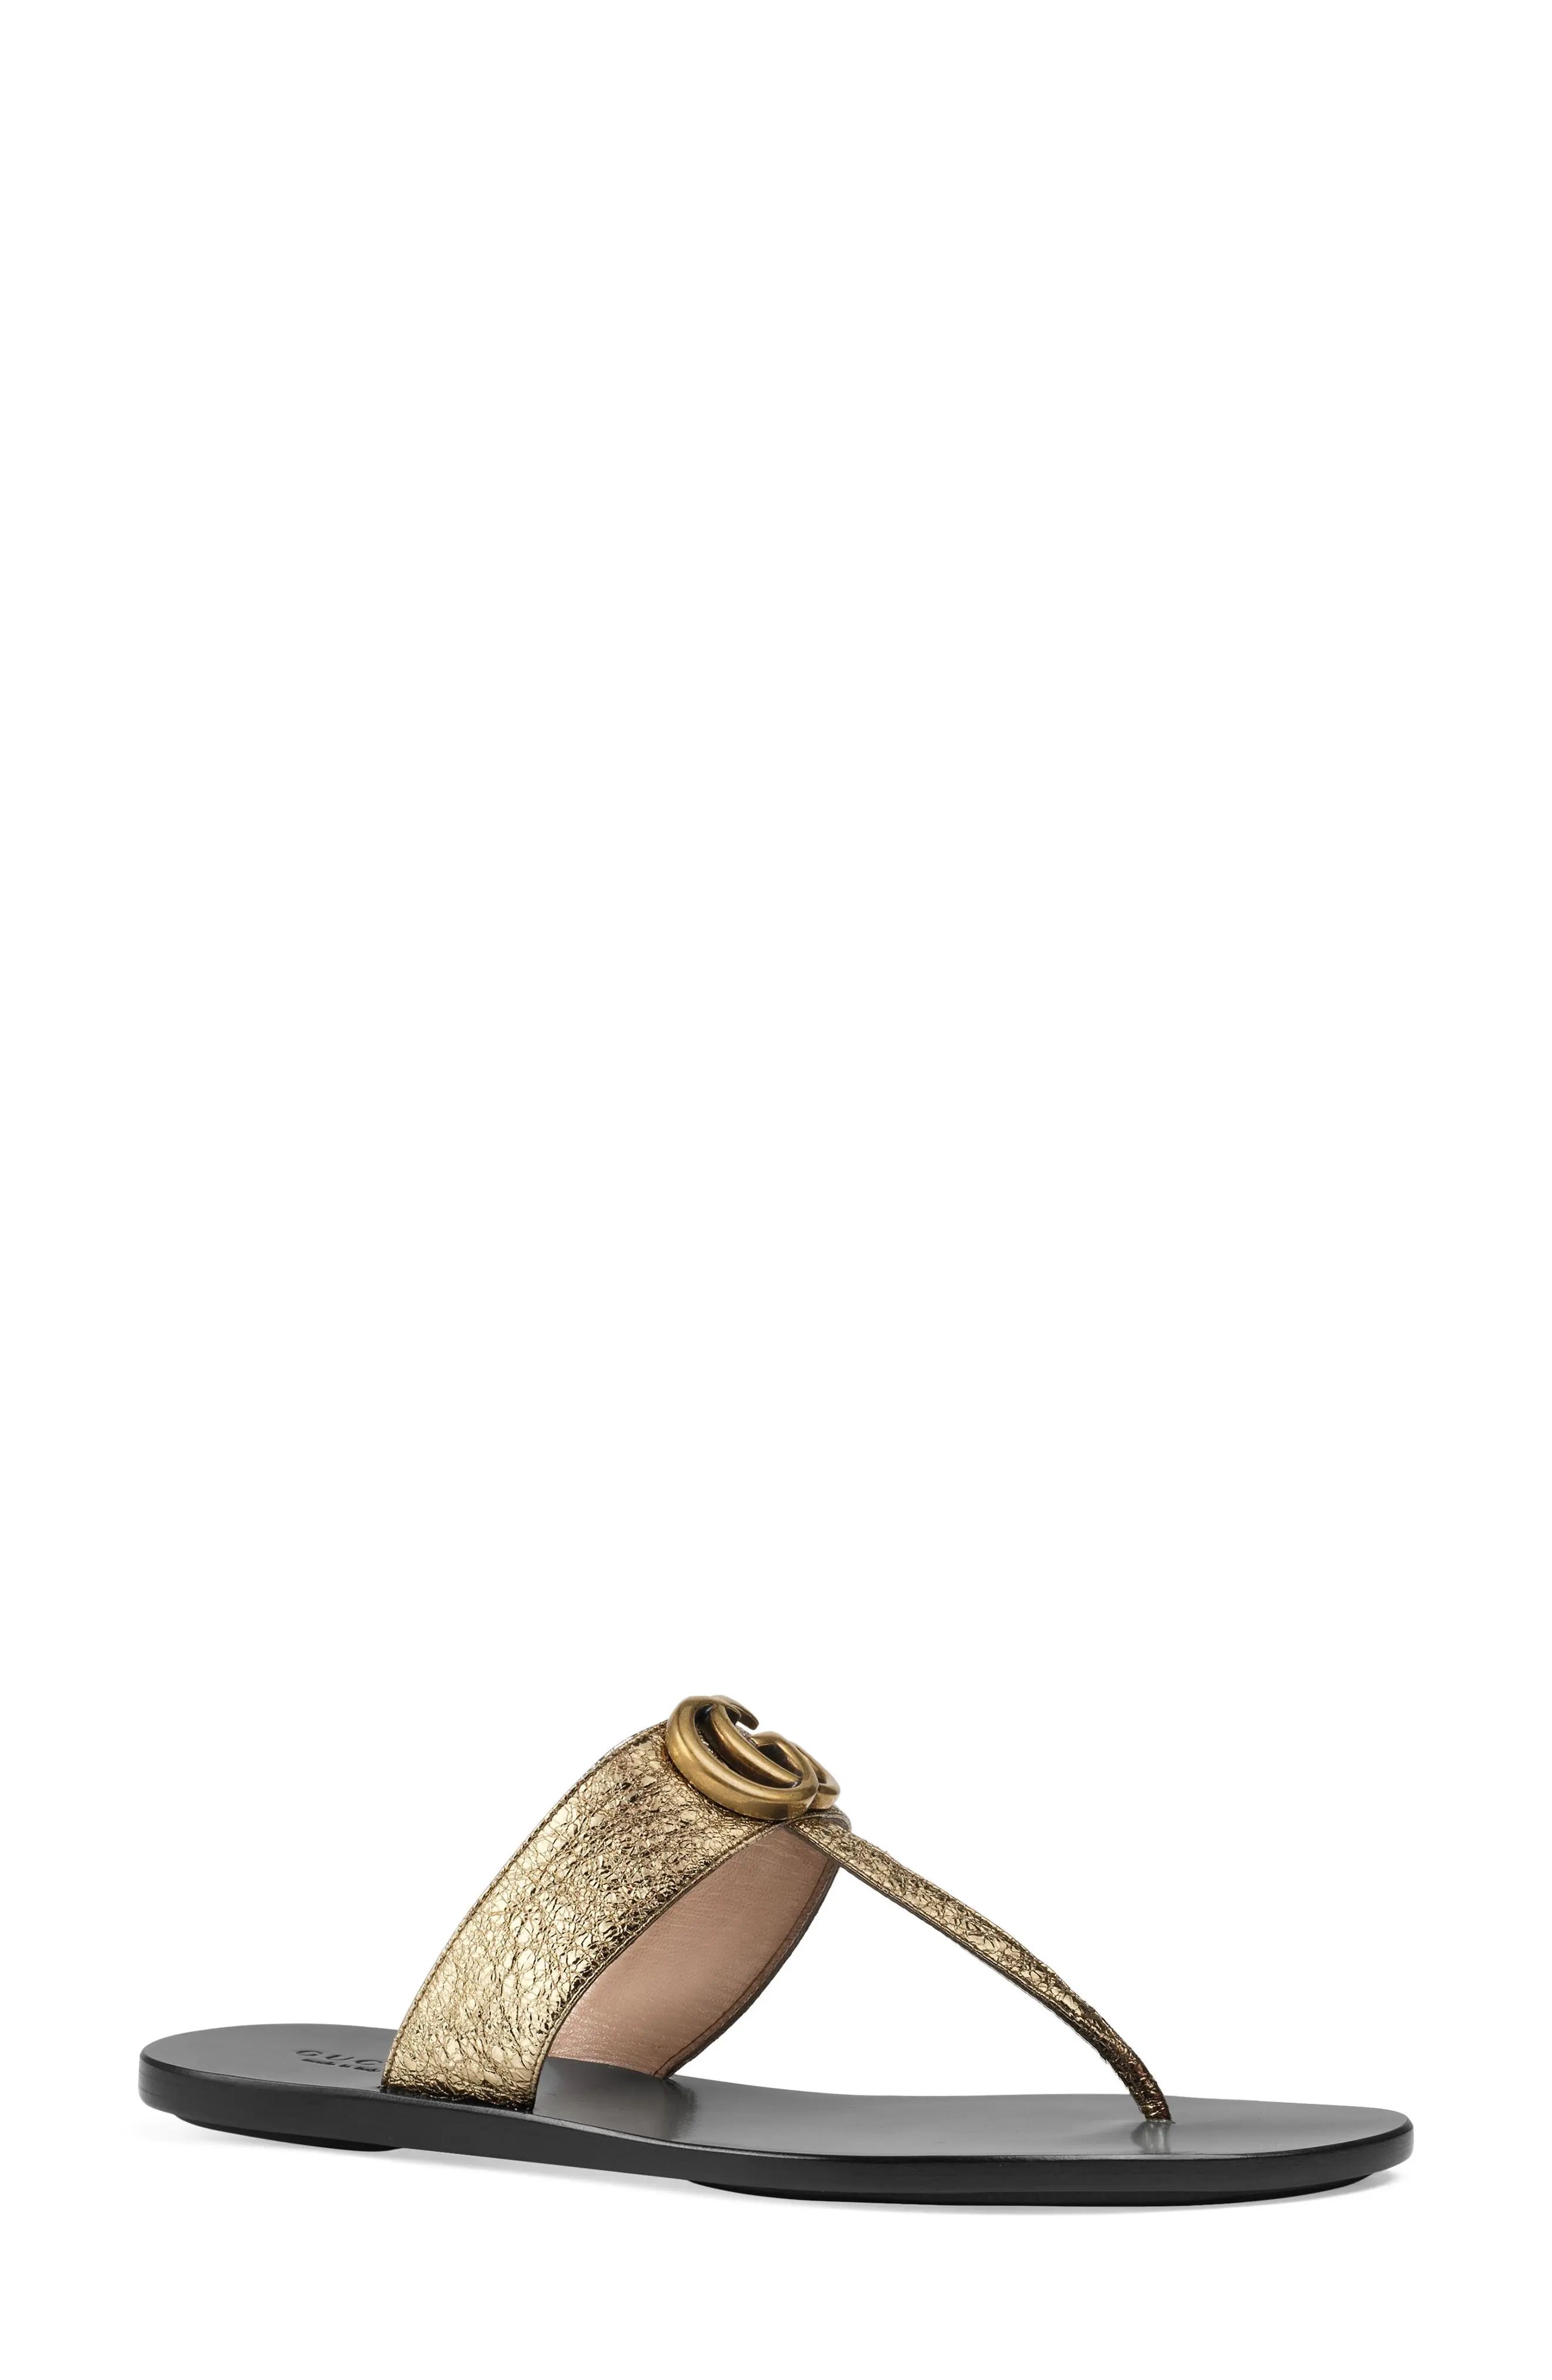 Gucci GG T-Strap Sandal in Platino at Nordstrom, Size 4.5Us | Nordstrom